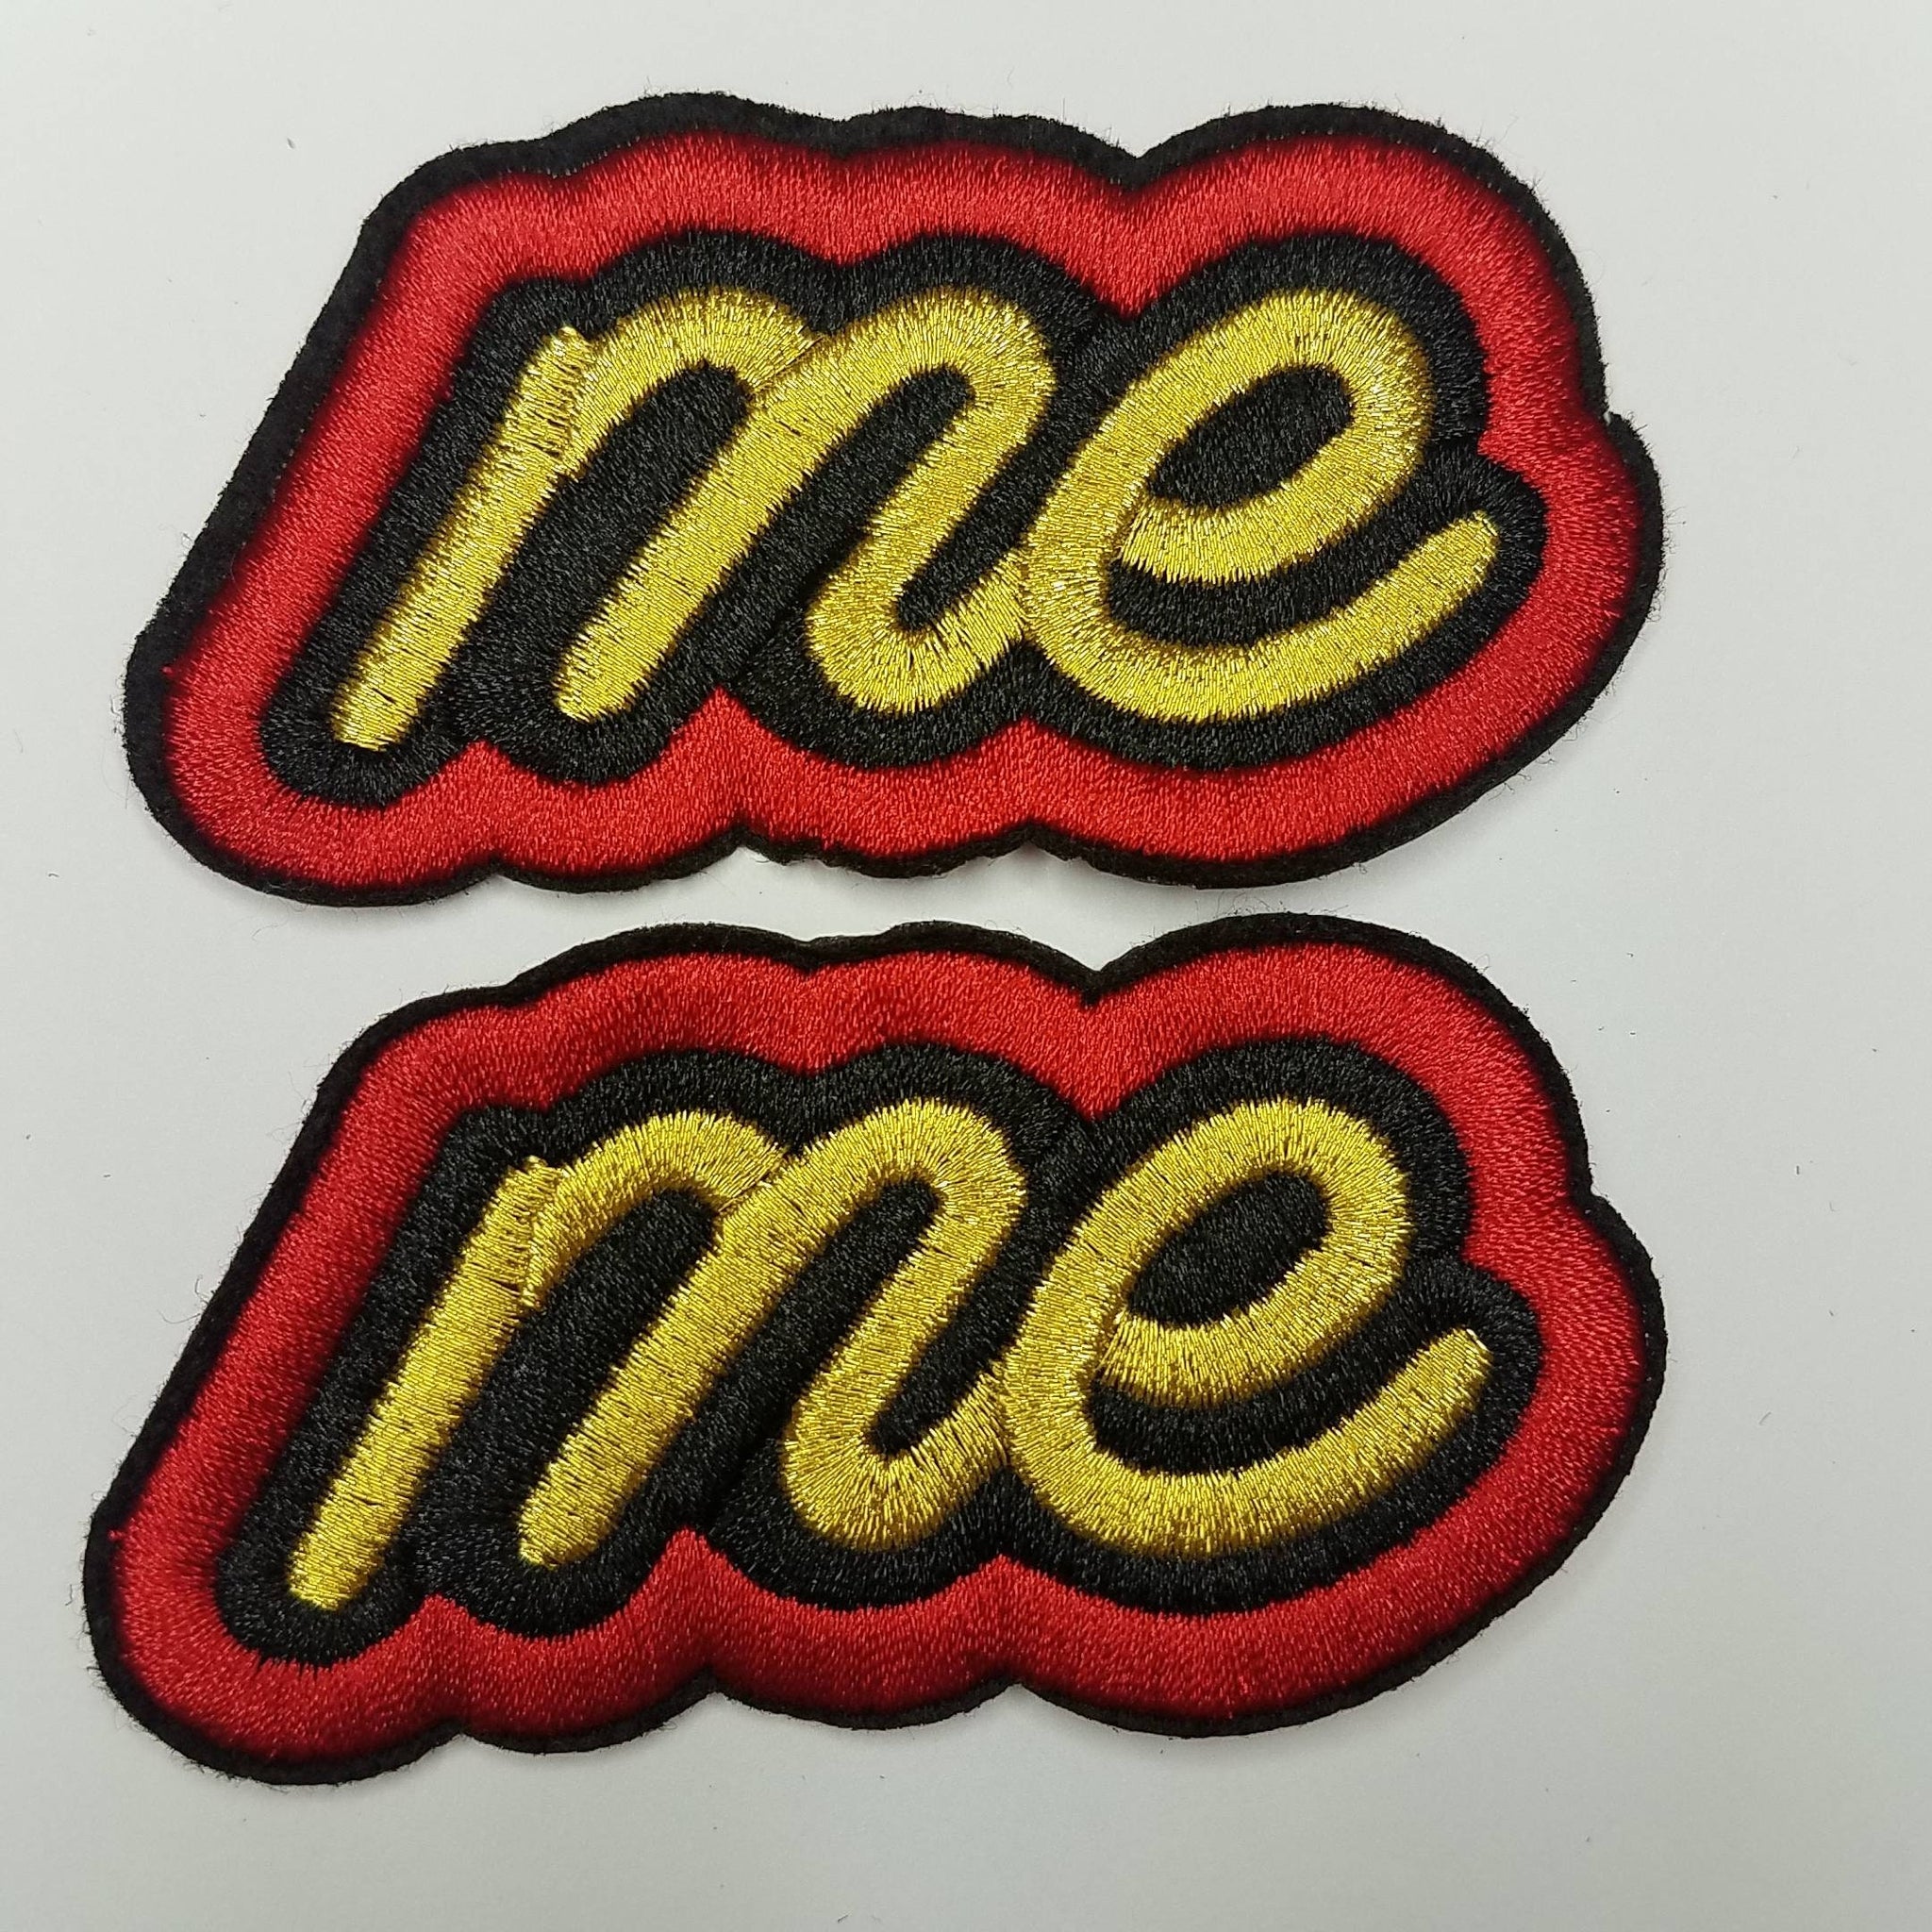 2-pc set, Metallic "Me" Patch, Gold, Black, and Red Iron-On Embroidered Applique; Patch for Clothing, Size 2"